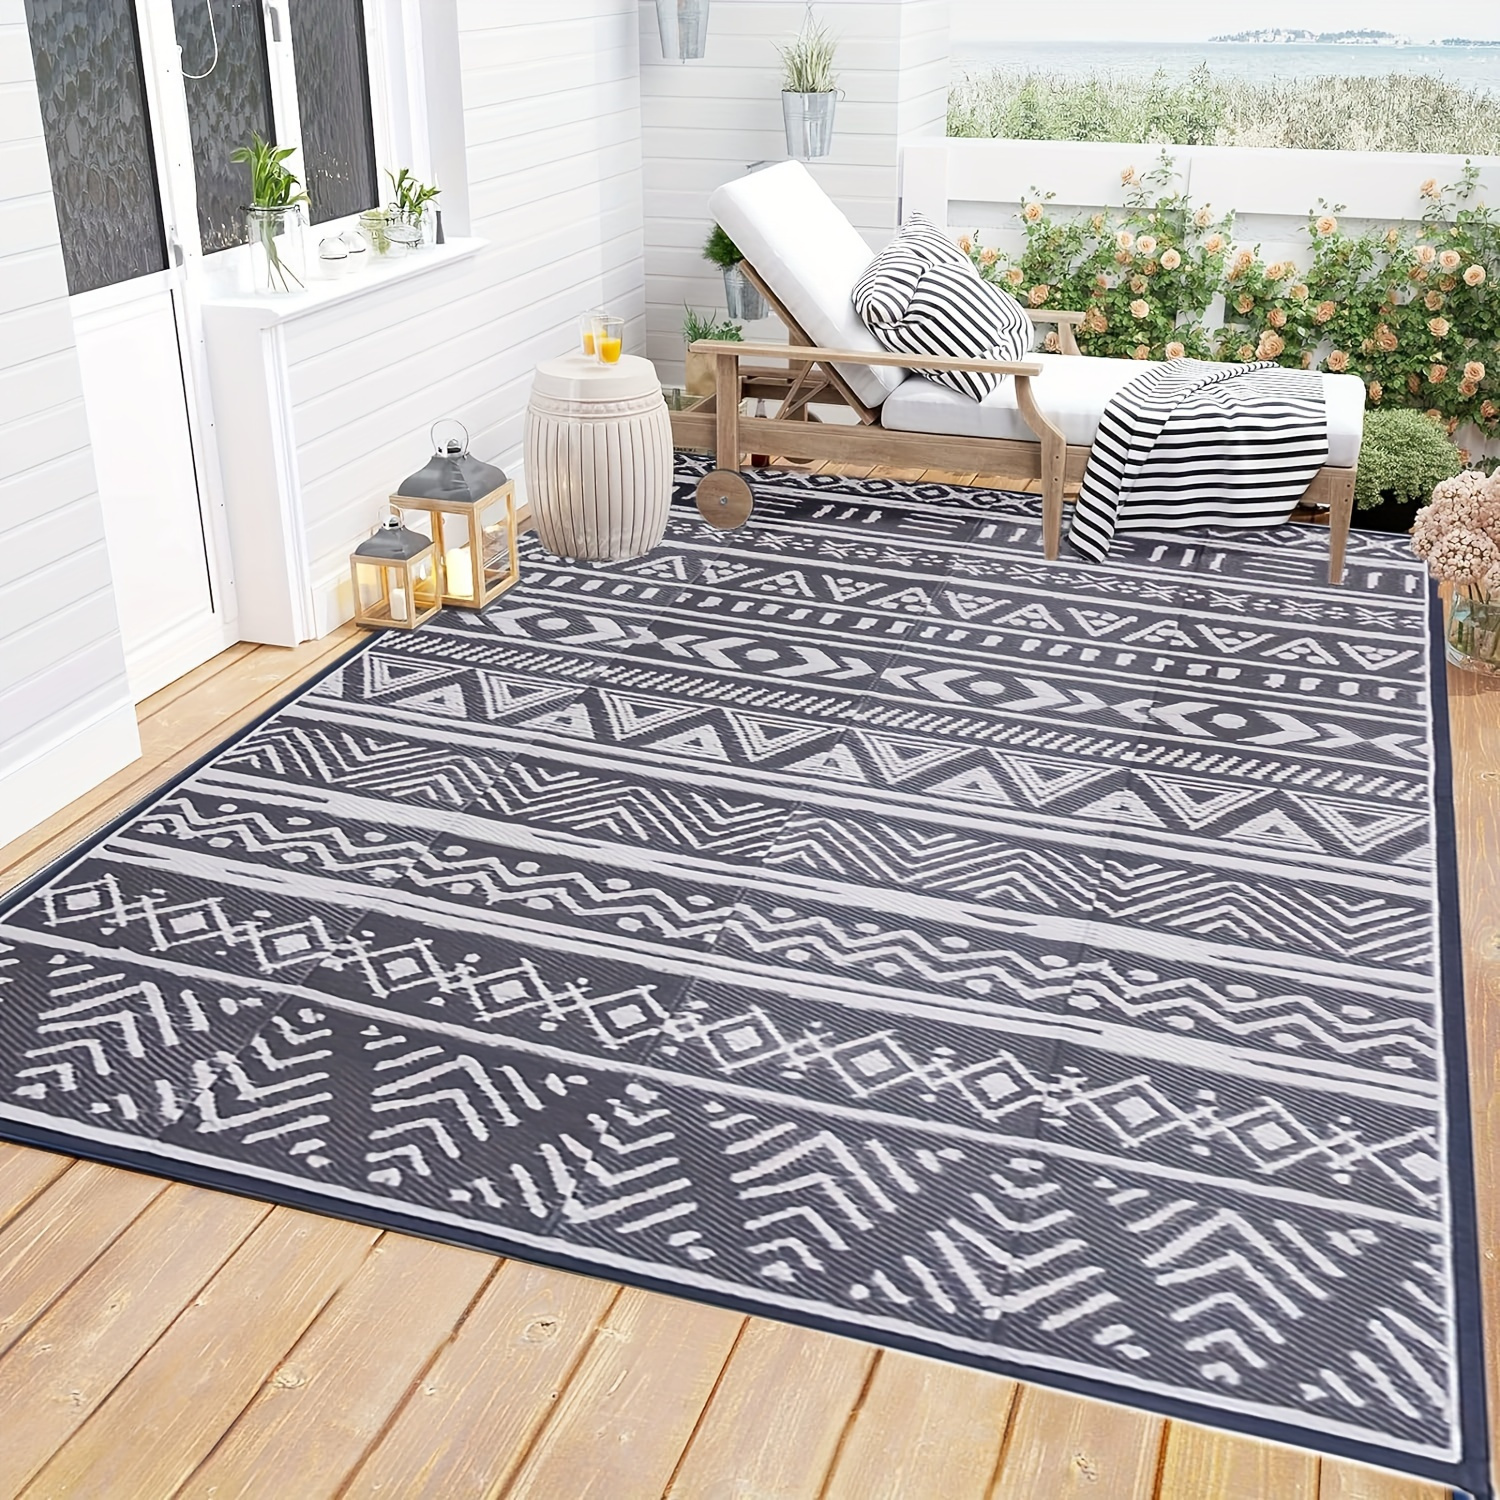 Large Waterproof Outdoor Rug Mats For Rv, Deck, Camping, And Indoor/outdoor  Use - Reversible, Portable, And Durable - 5x8, 6x9, Or - Temu